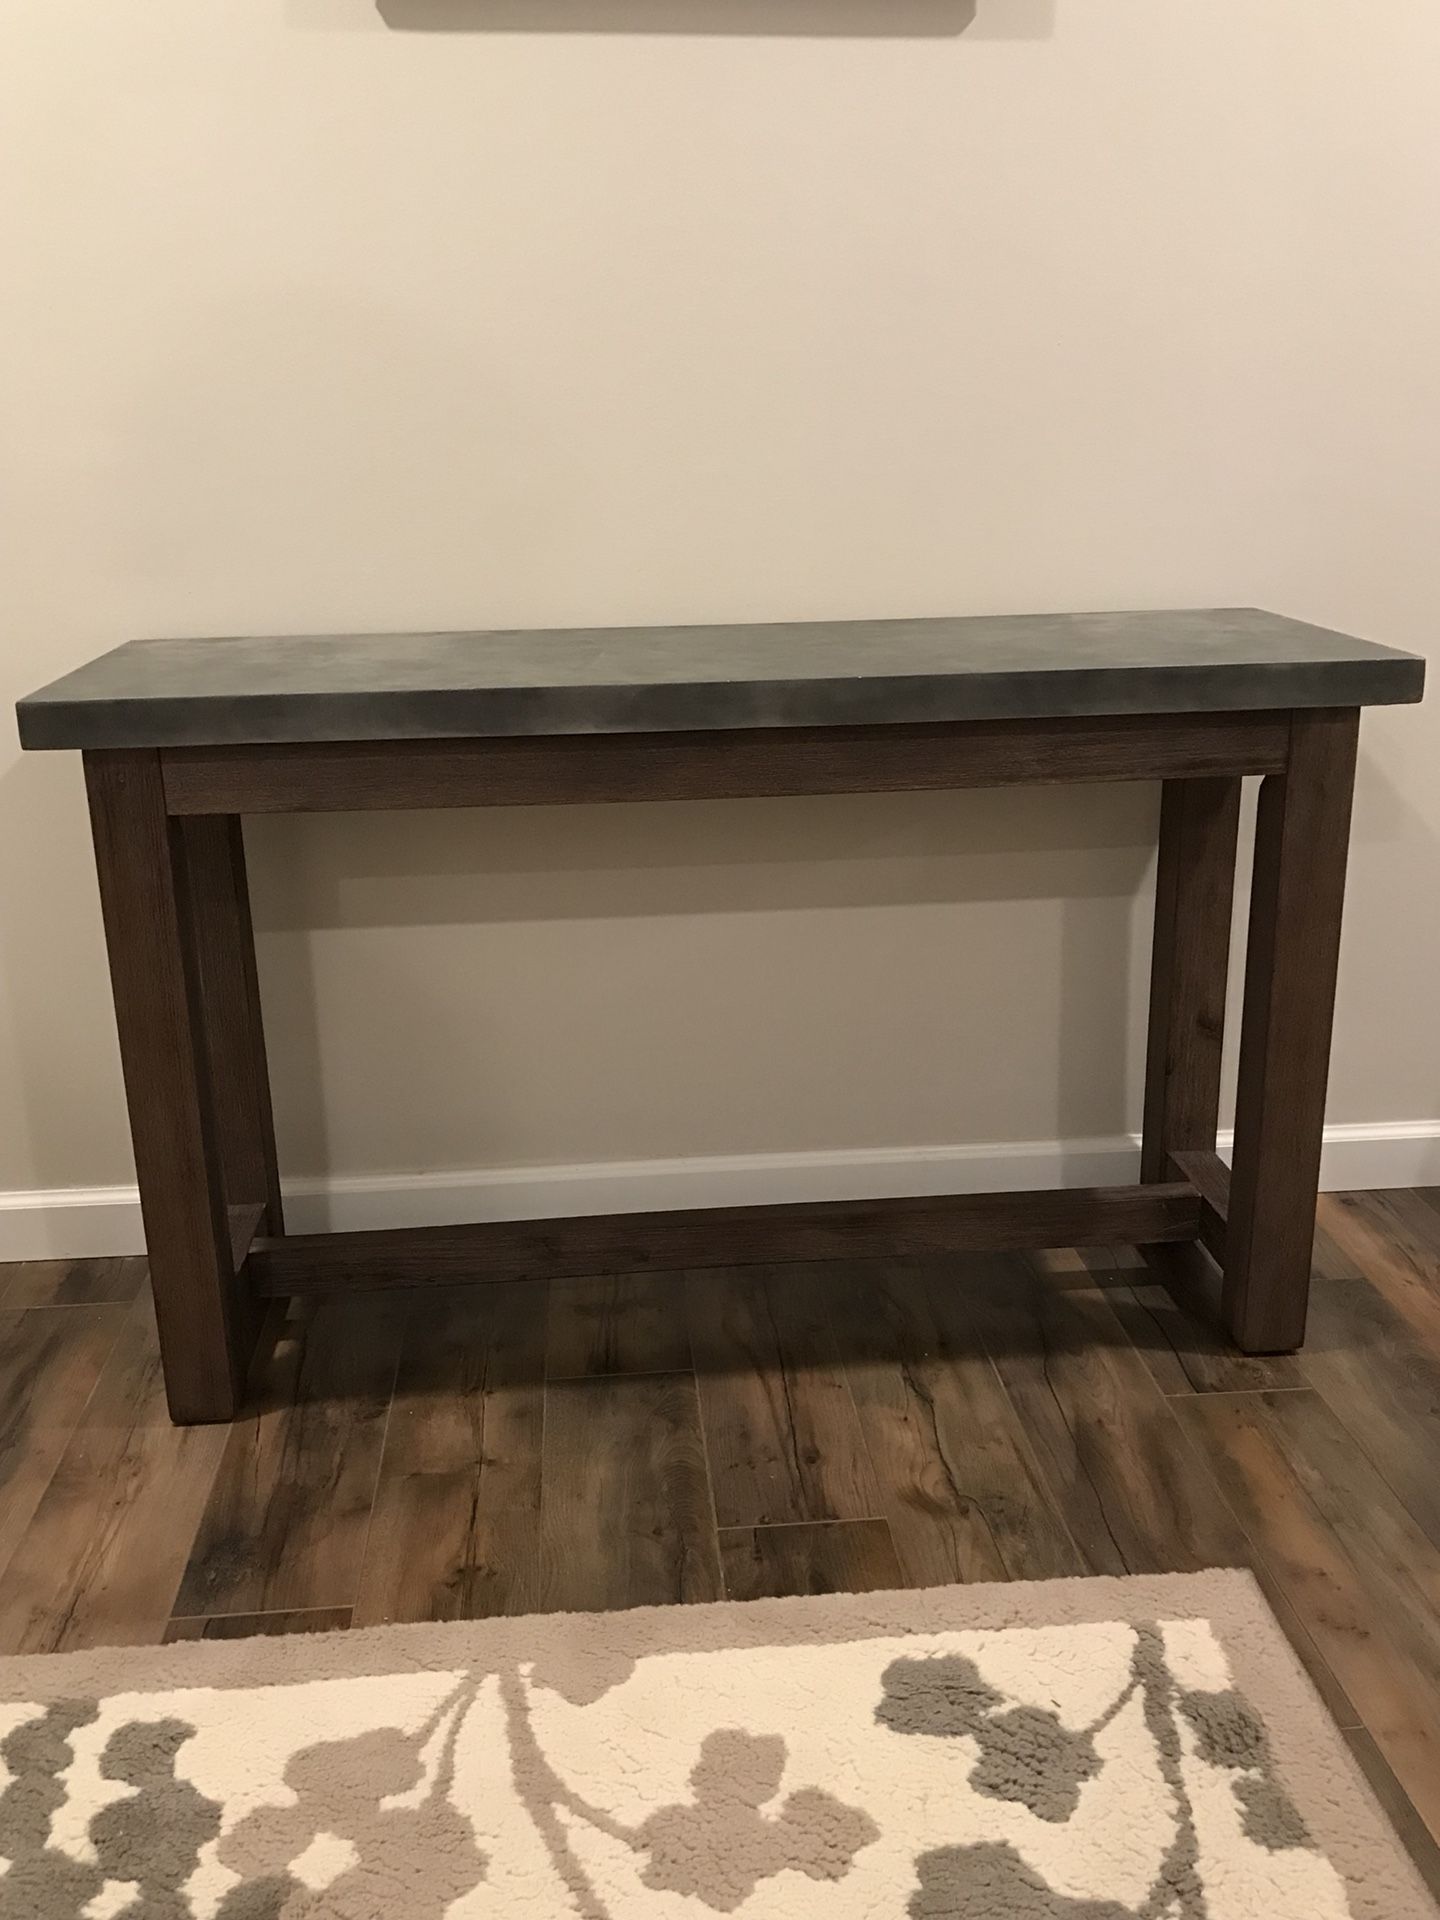 End Table and Console Table Set - Like New